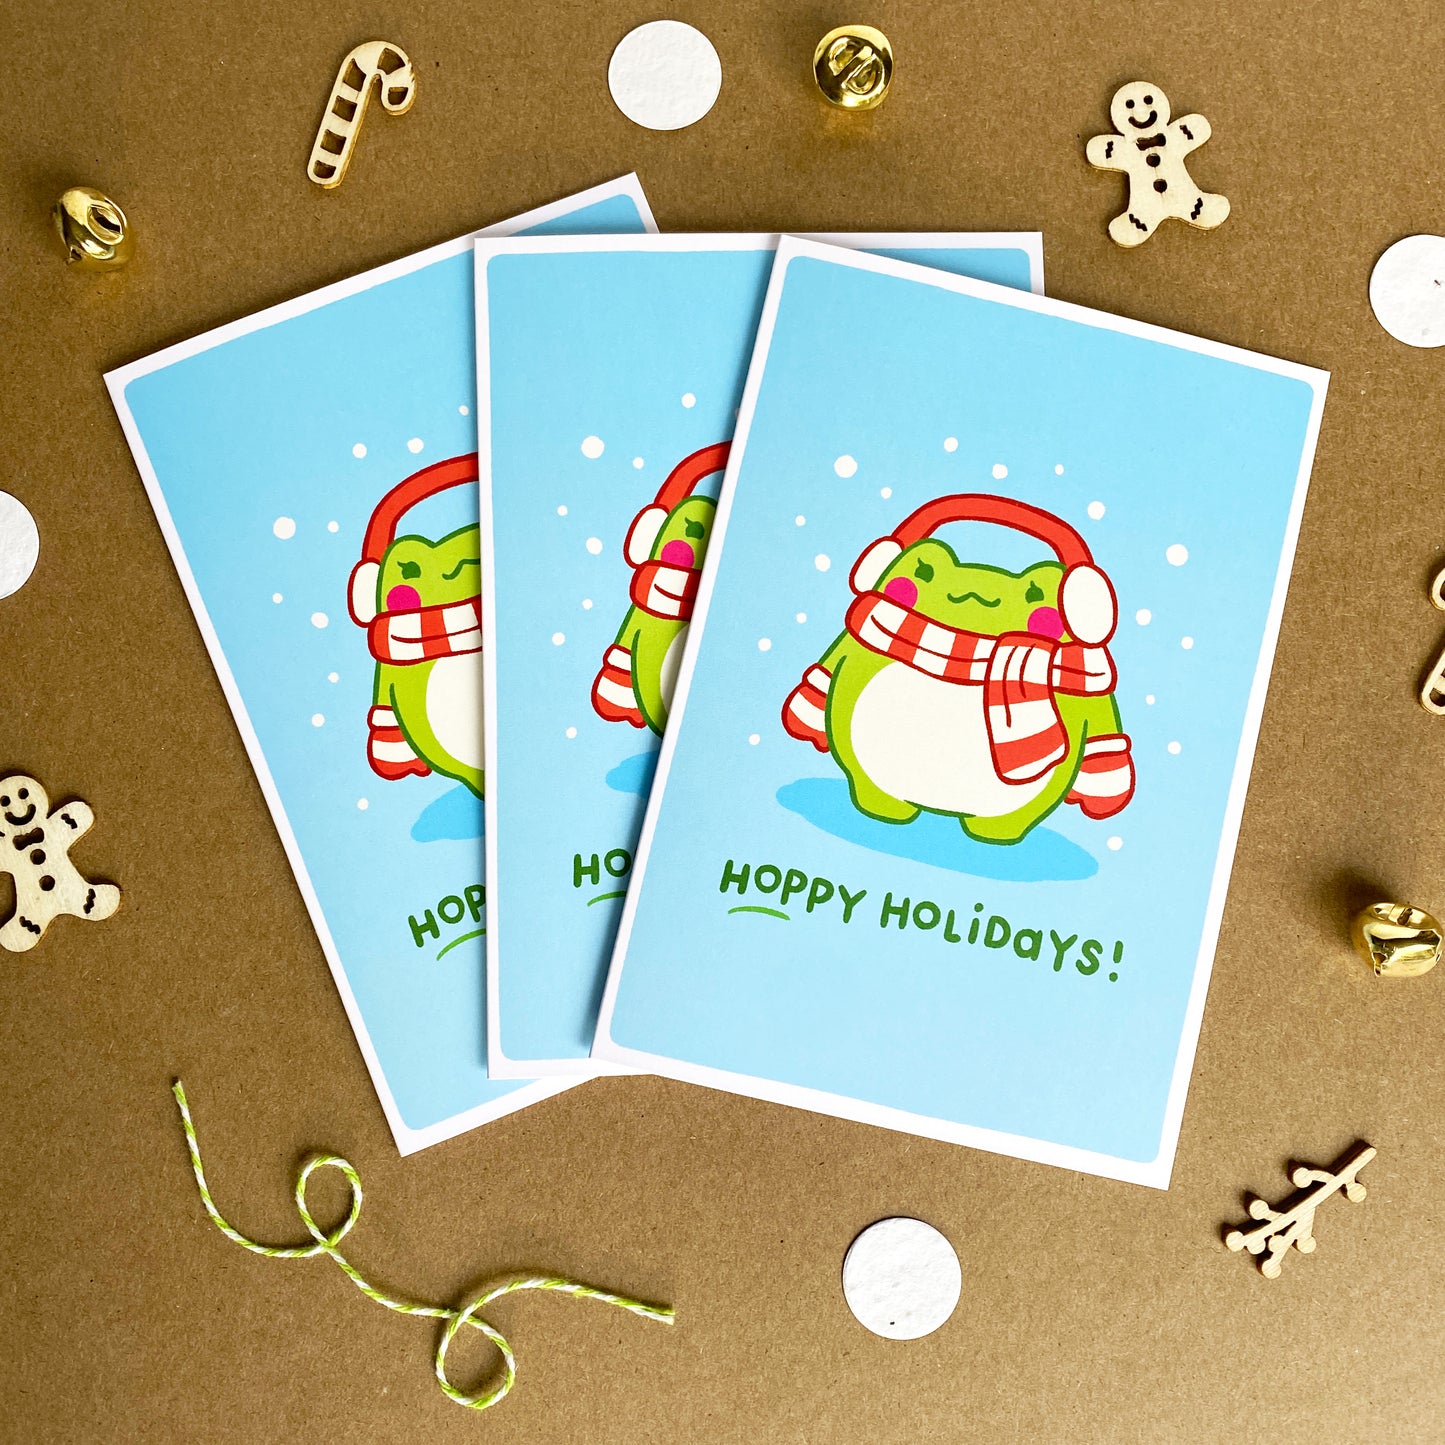 VALUE PACK "Hoppy Holidays" Froggy Greeting Cards | Holiday Cards